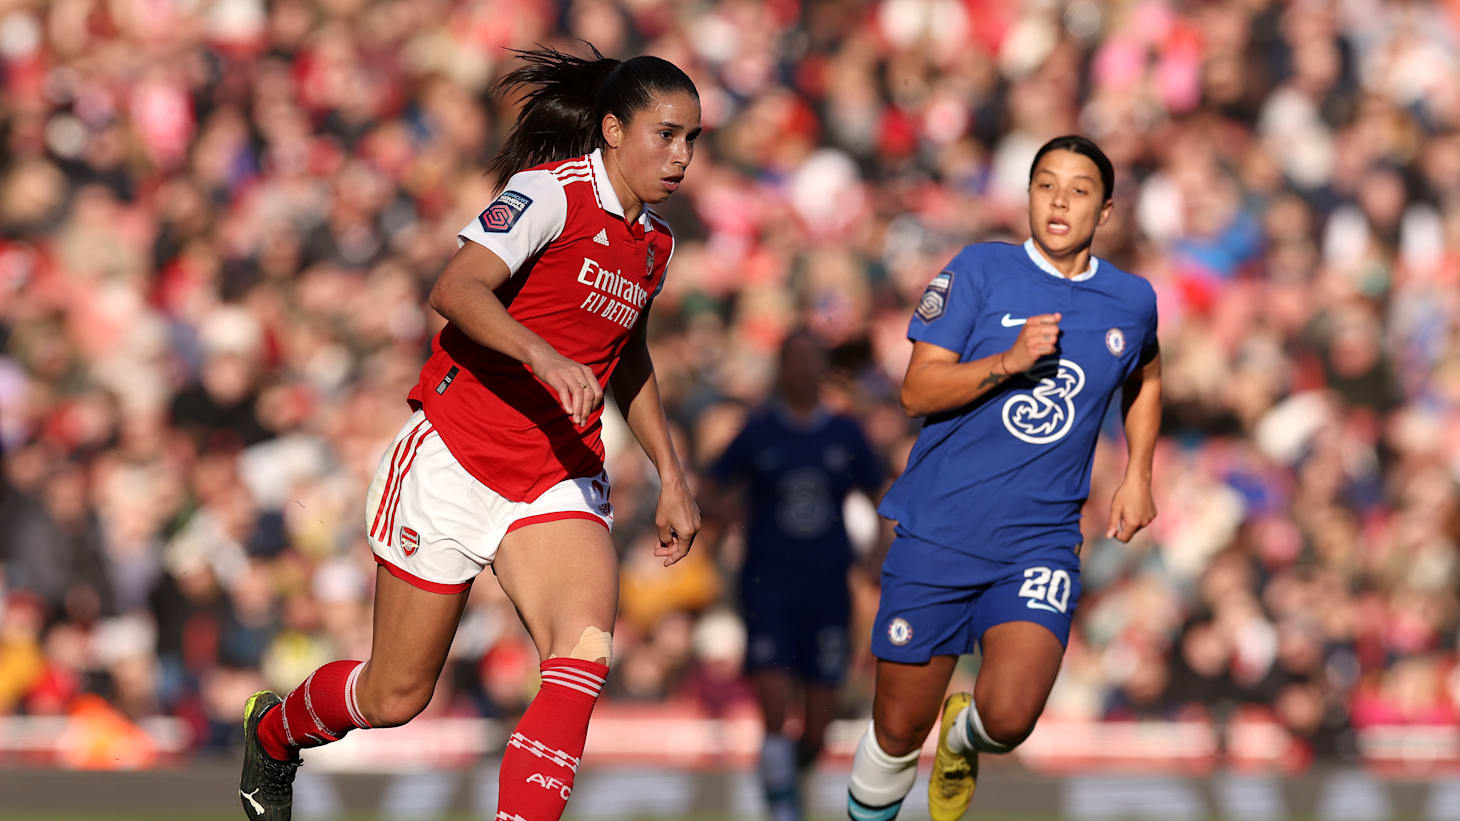 Rafaelle Souza Why the Arsenal star almost quit football and how she has impacted Brazil